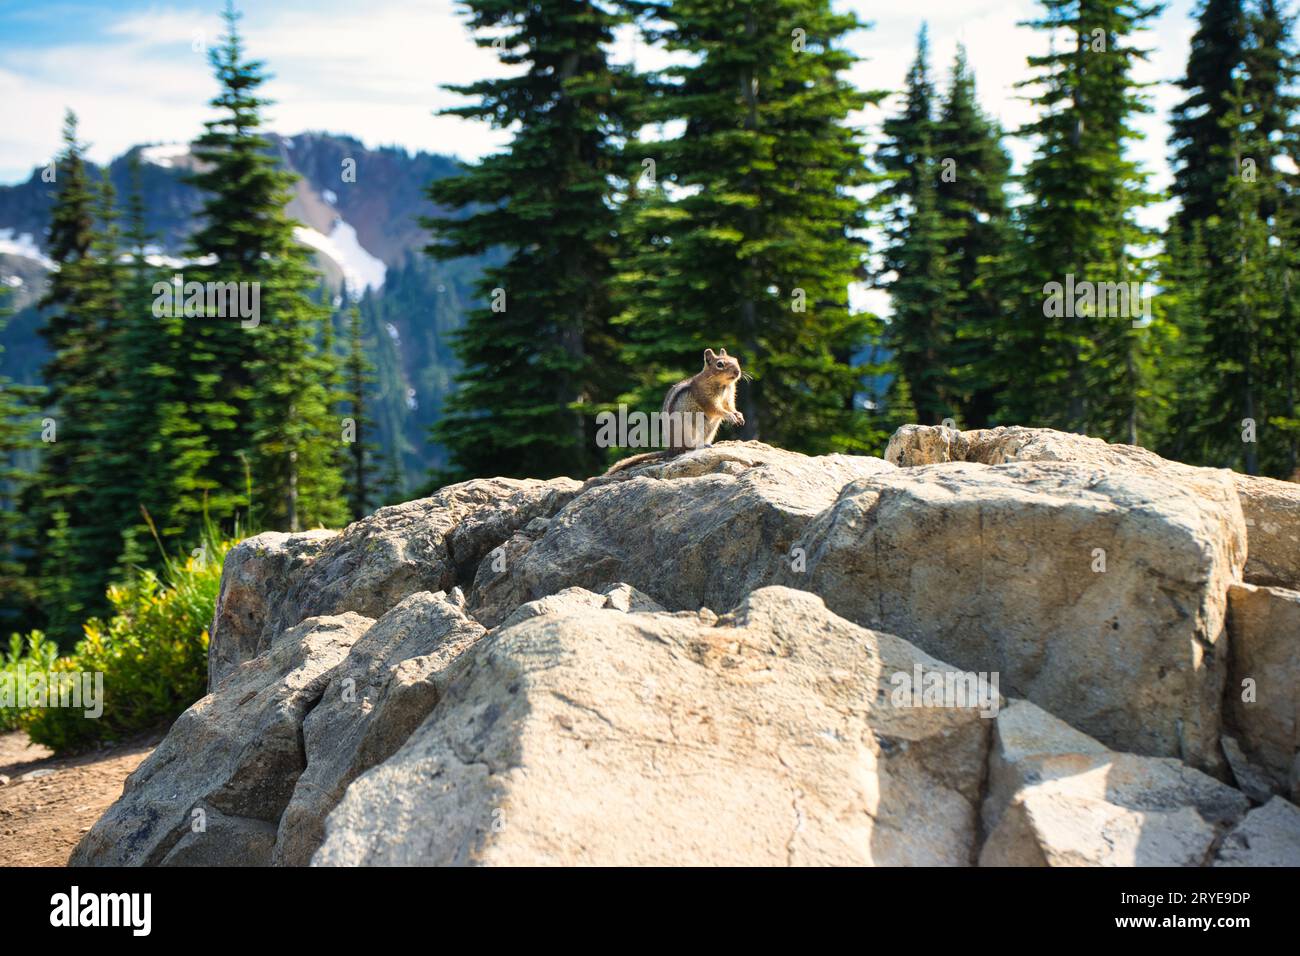 A chipmunk sits on rocks in the summer in front of evergreens and mountain landscape on hiking trail at Mount Rainier National Park in Washington. Stock Photo